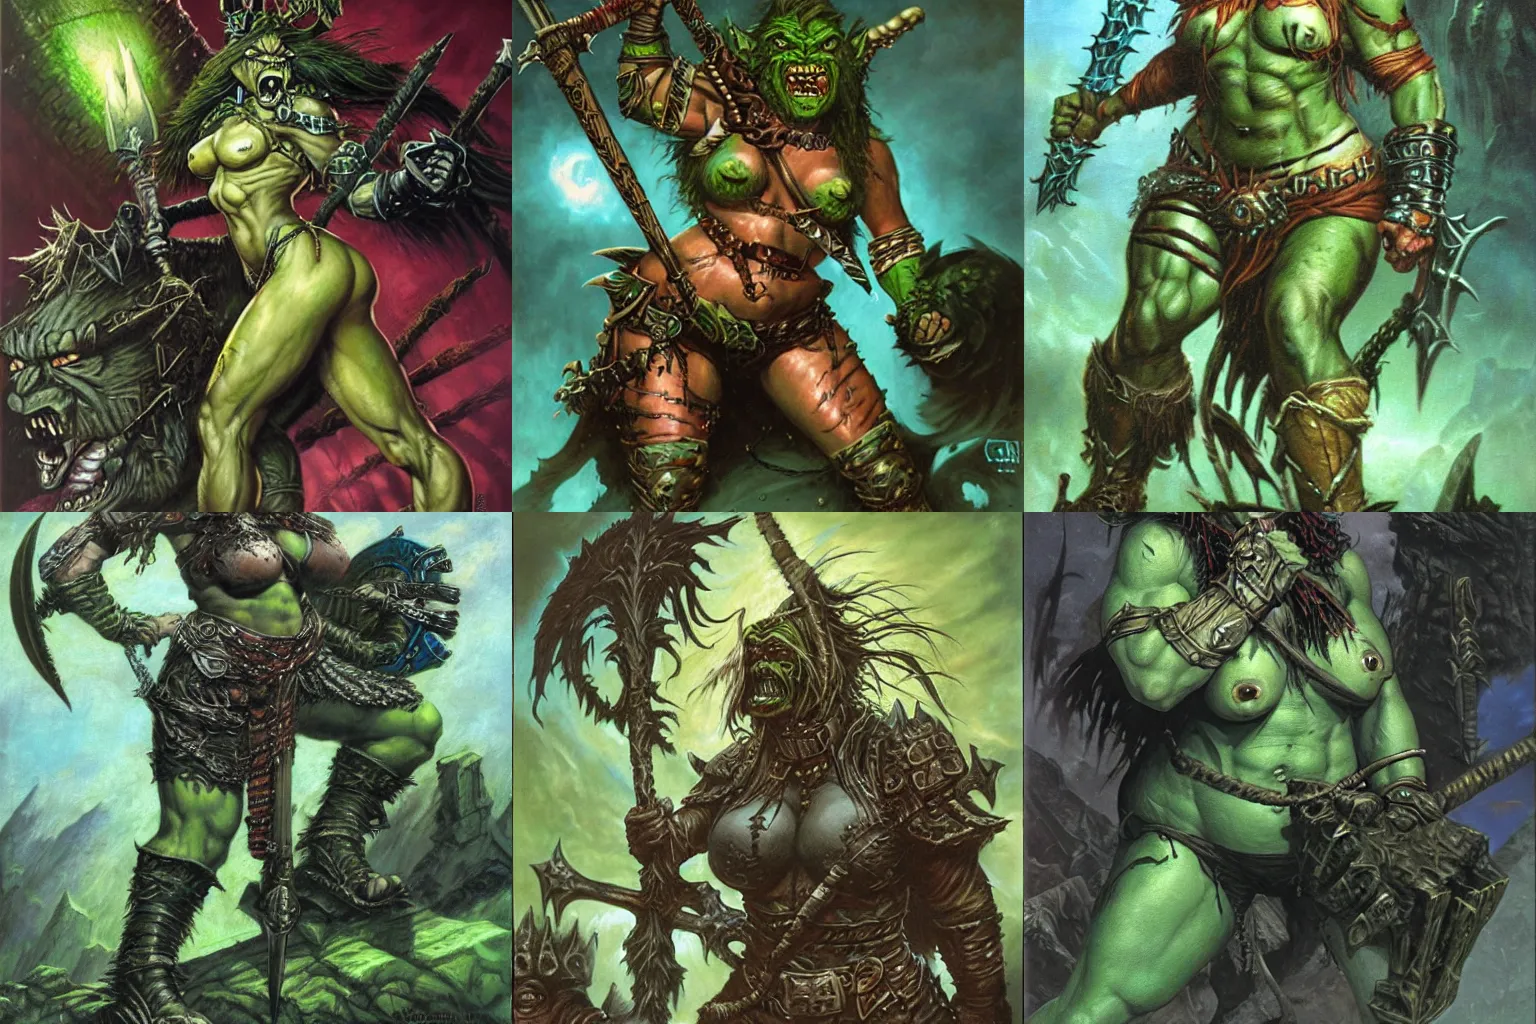 Prompt: A big green orc lady barbarian. Fierce fantasy artwork by Greg staples and Kev Walker, oil painting on matte canvas